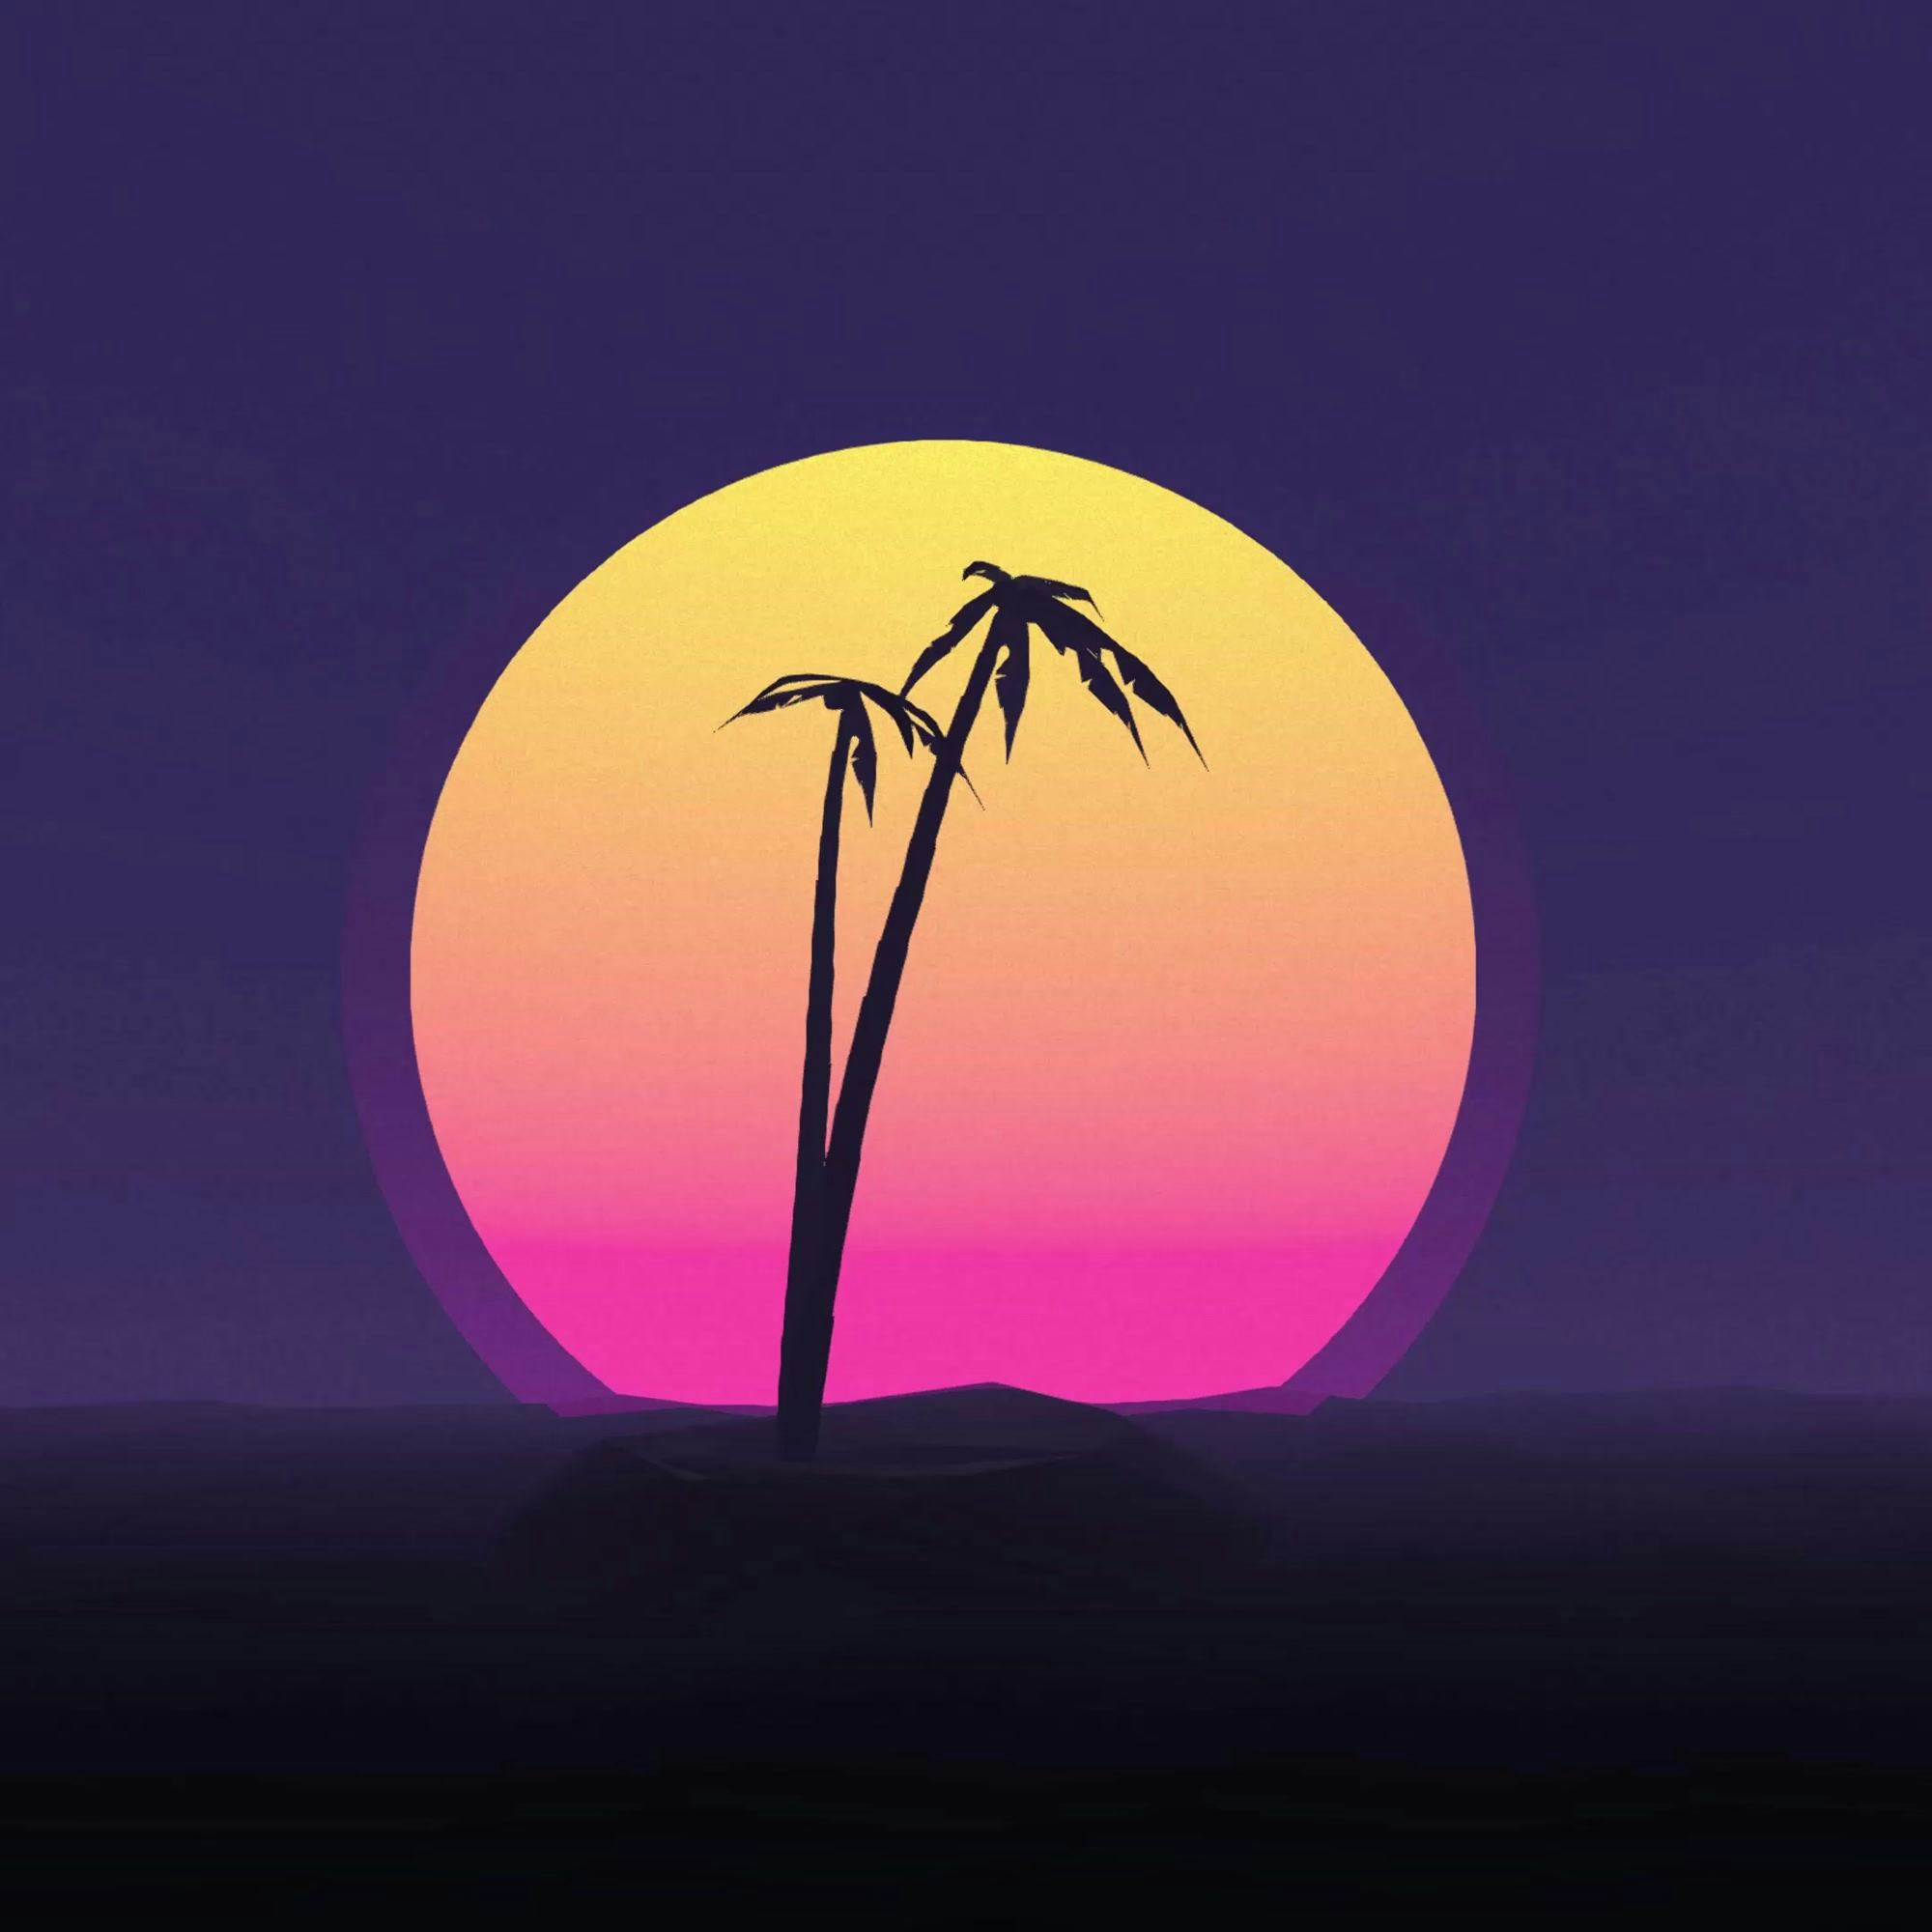 Silhouette of 2 palm trees with a big orange sun on the background